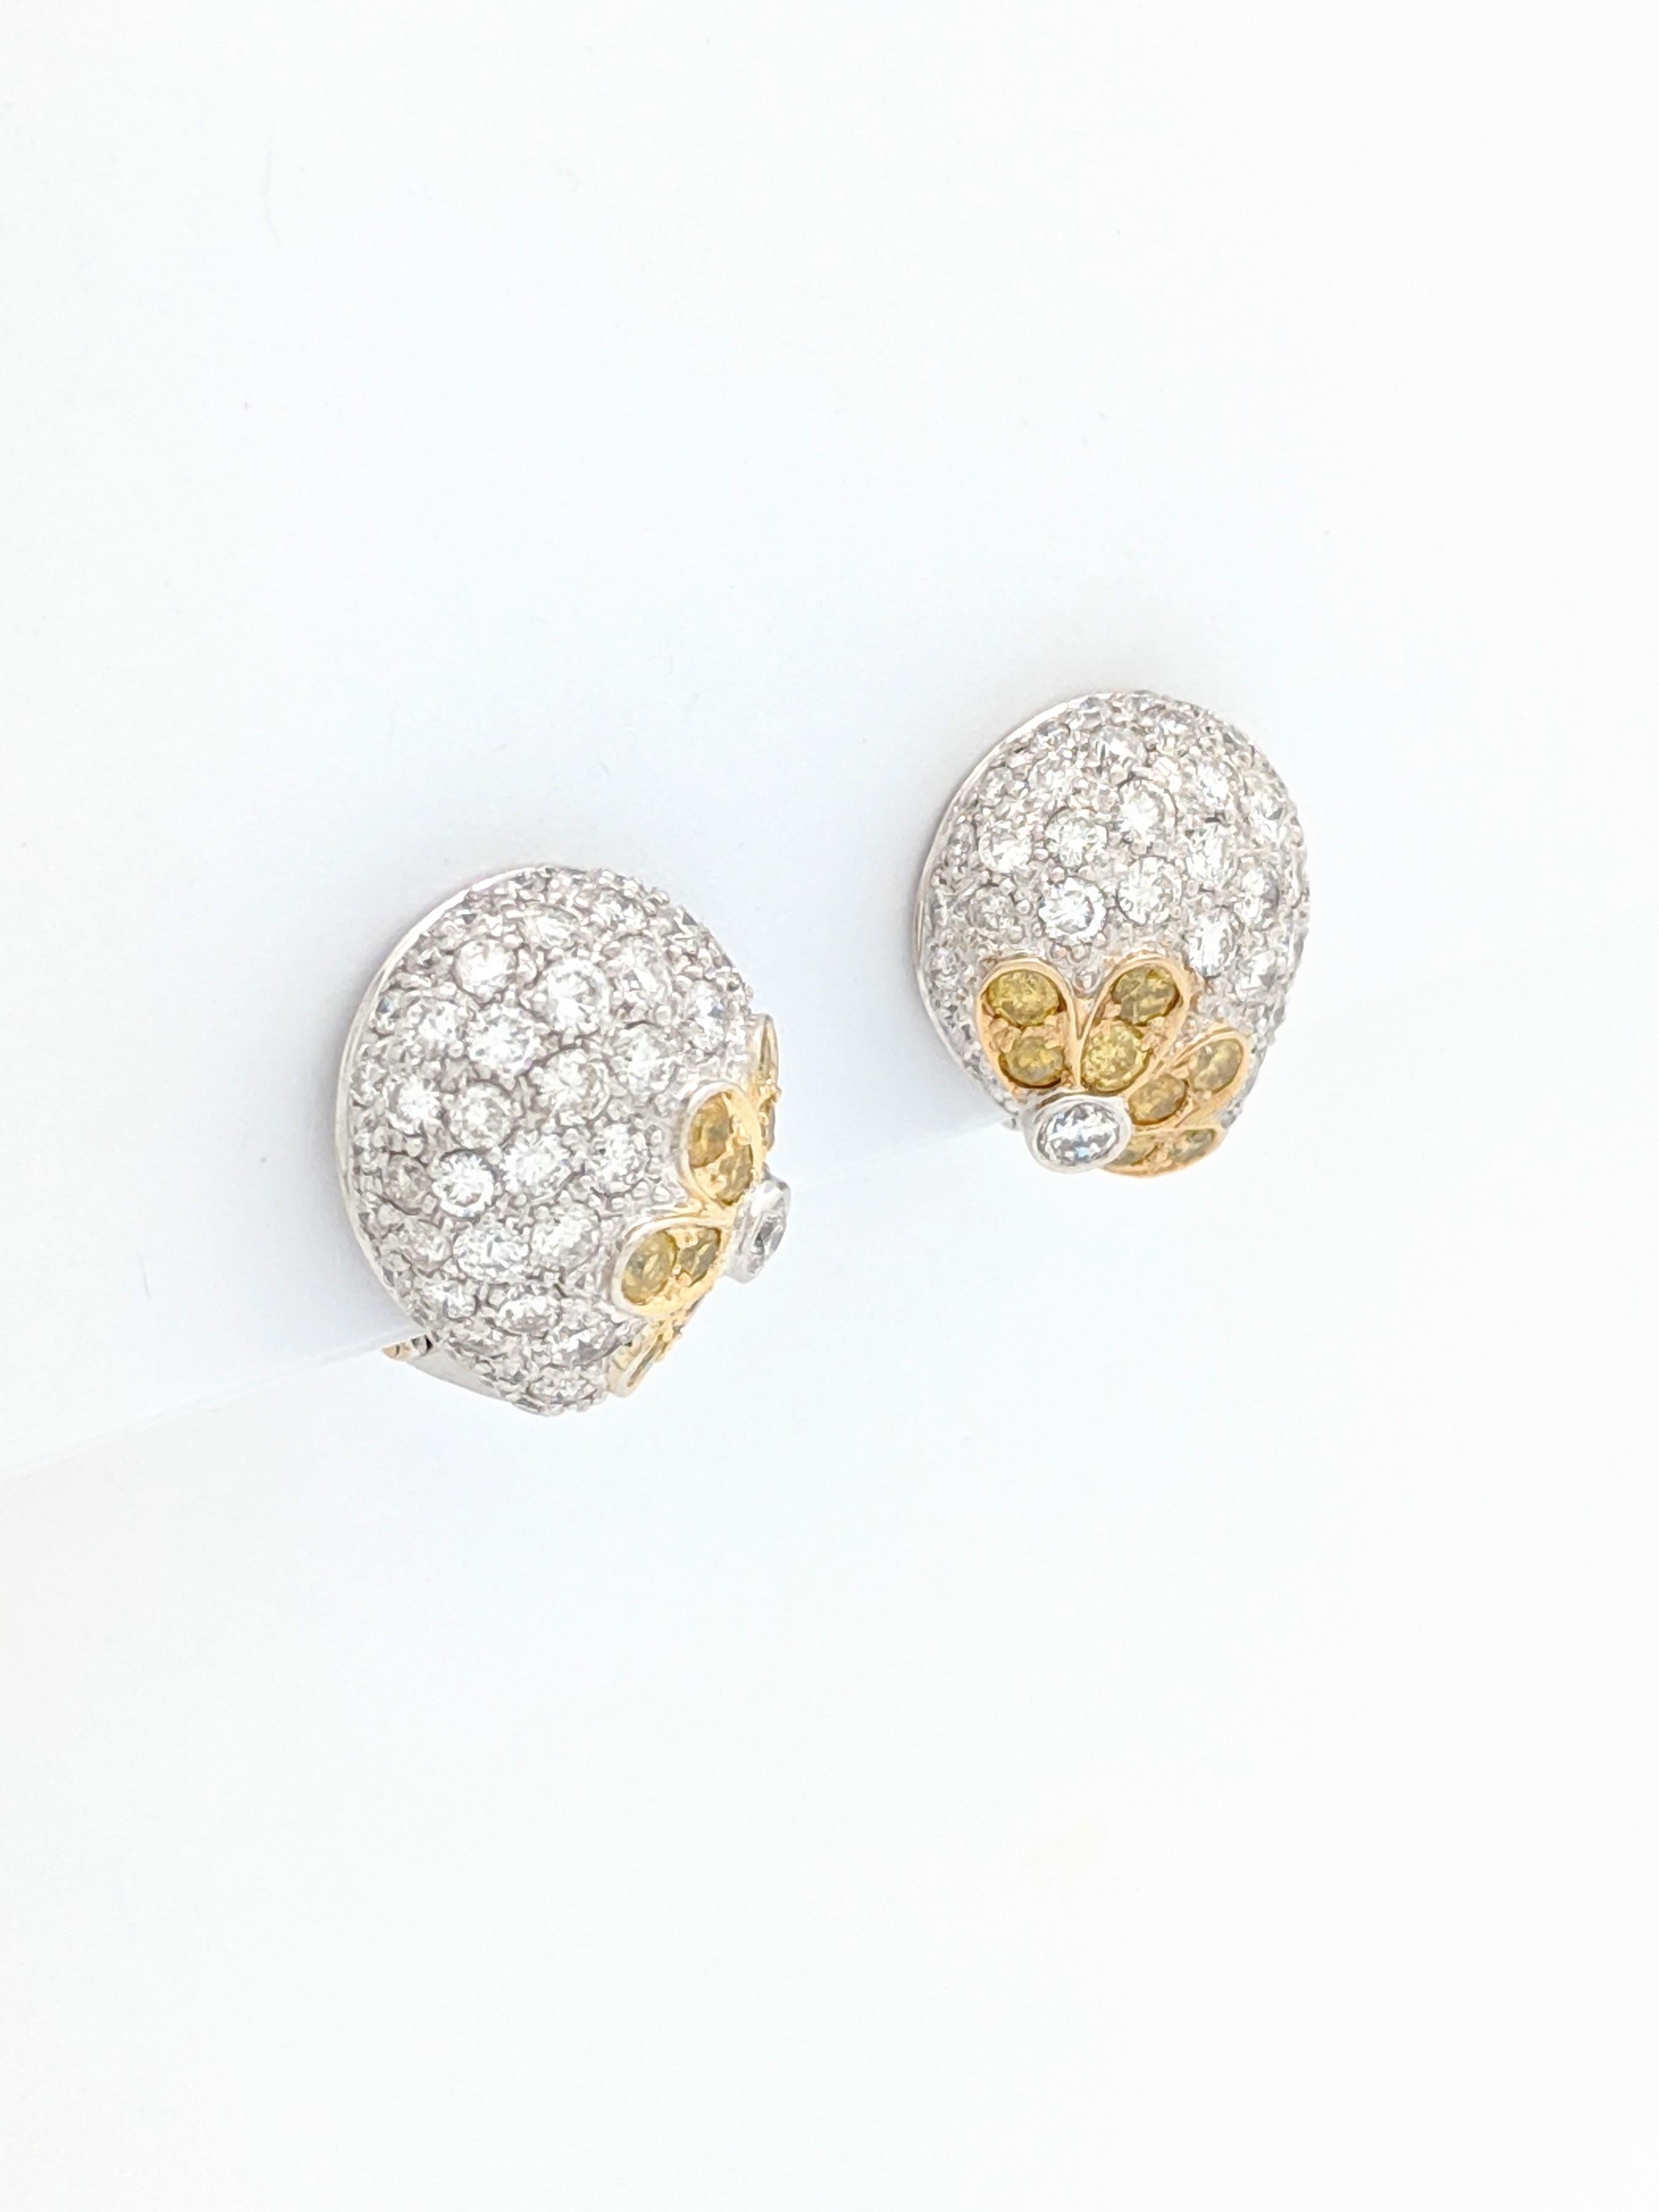 Contemporary 18 Karat White Gold 3 Carat Fancy Yellow and White Diamond Omega Back Earrings For Sale